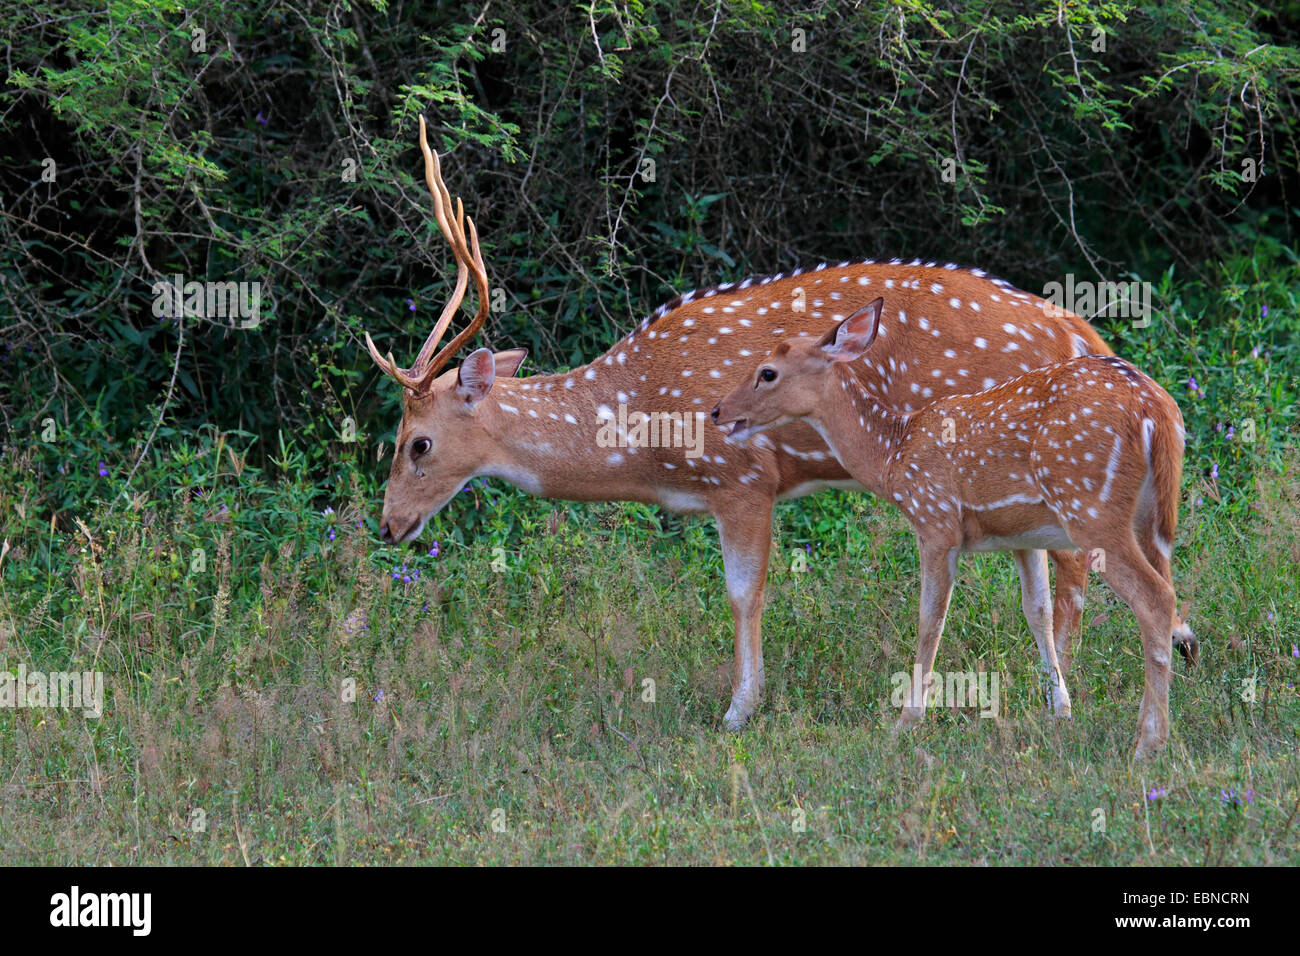 spotted deer, axis deer, chital (Axis axis, Cervus axis), stag standing with a calf in front of bushes, Sri Lanka, Yala National Park Stock Photo